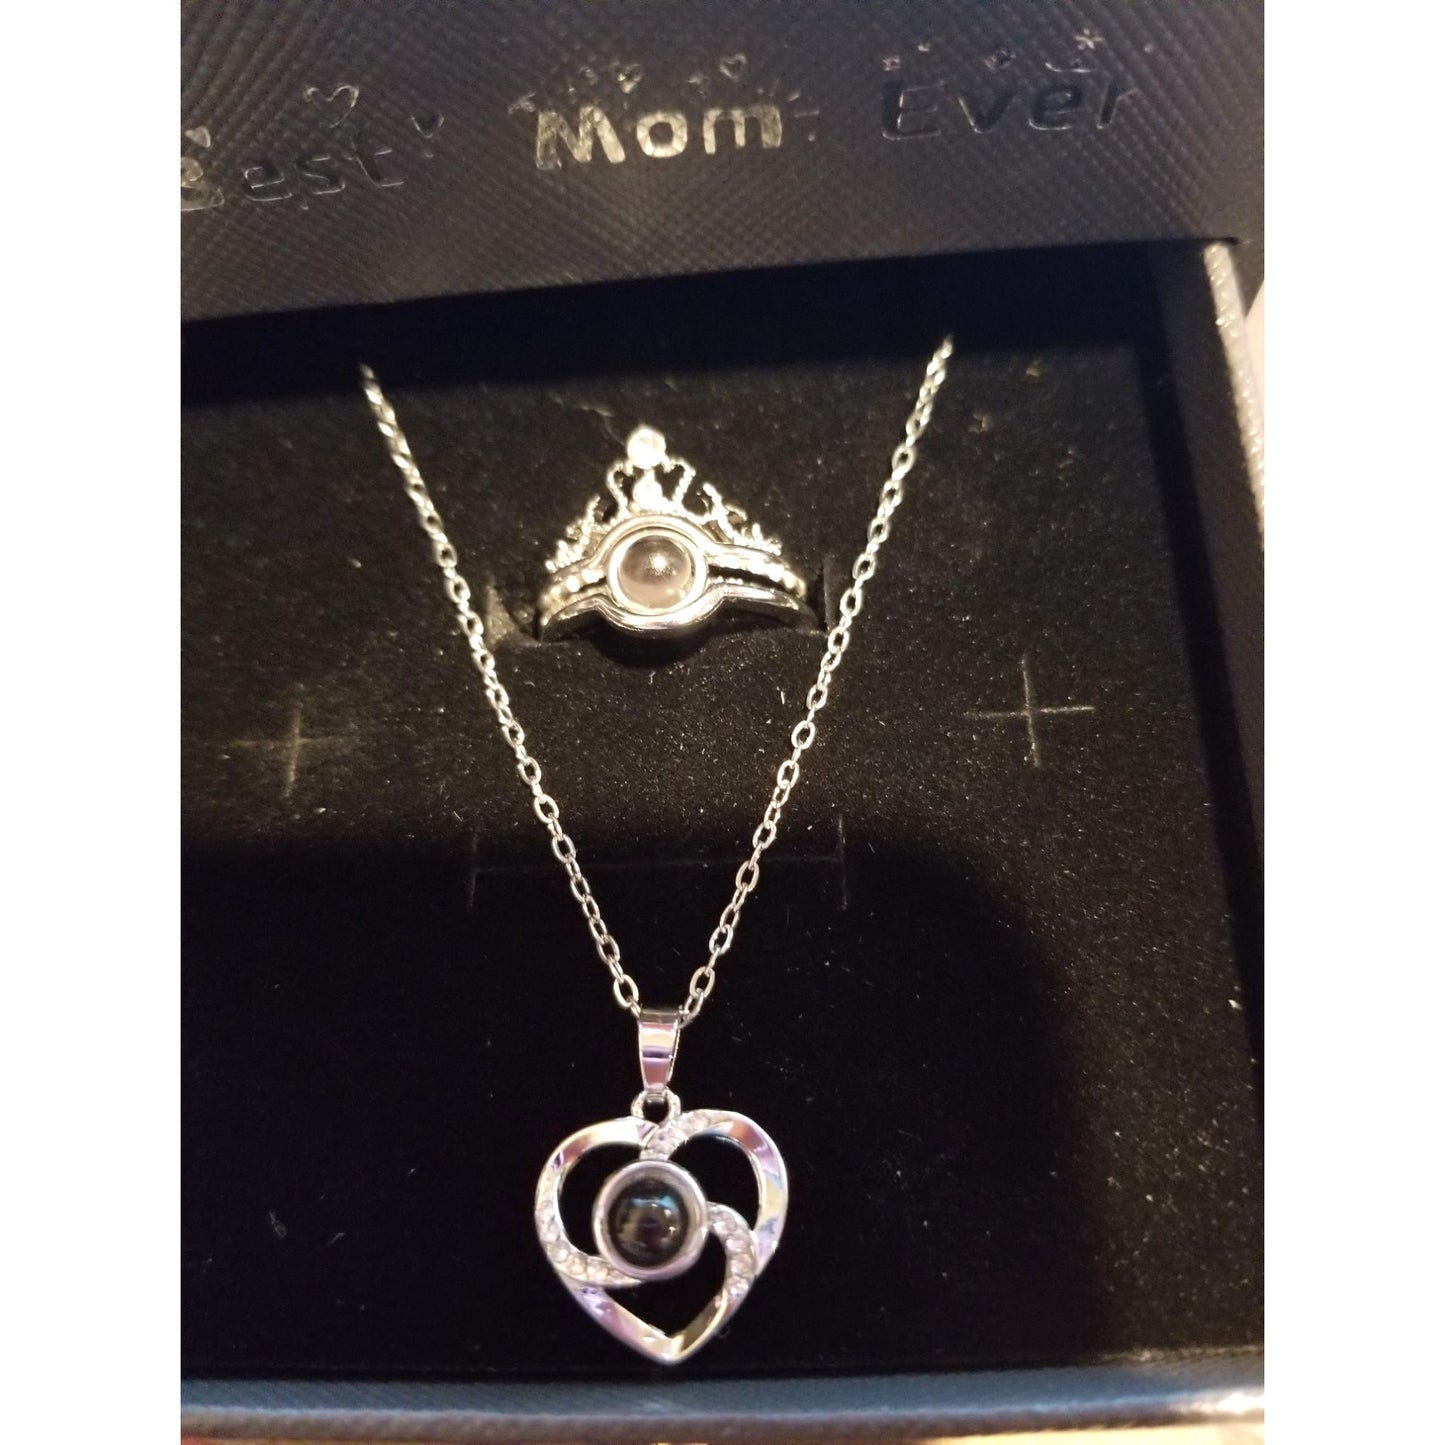 Gift Box For Mom Box says Best Mom Ever Necklace Heart Pendant and Ring with Red Rose Jewelry Storage Box for Women Mother's Day